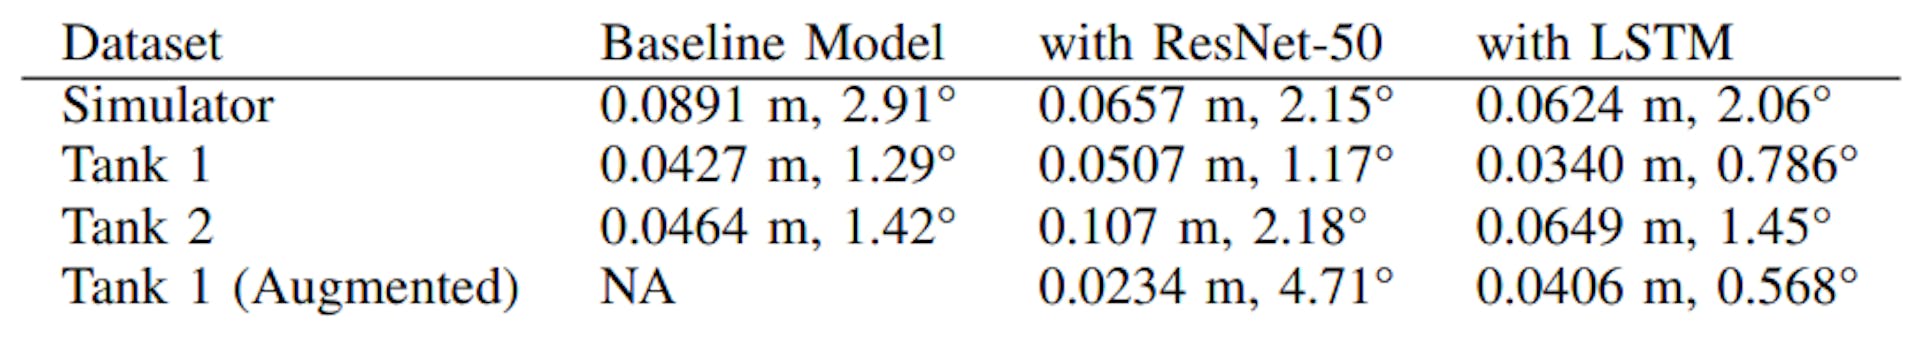 TABLE IMEAN LOCALIZATION RESULTS OF SEVERAL CONFIGURATIONS ON SIMULATOR DATASETS AND TANK DATASETS